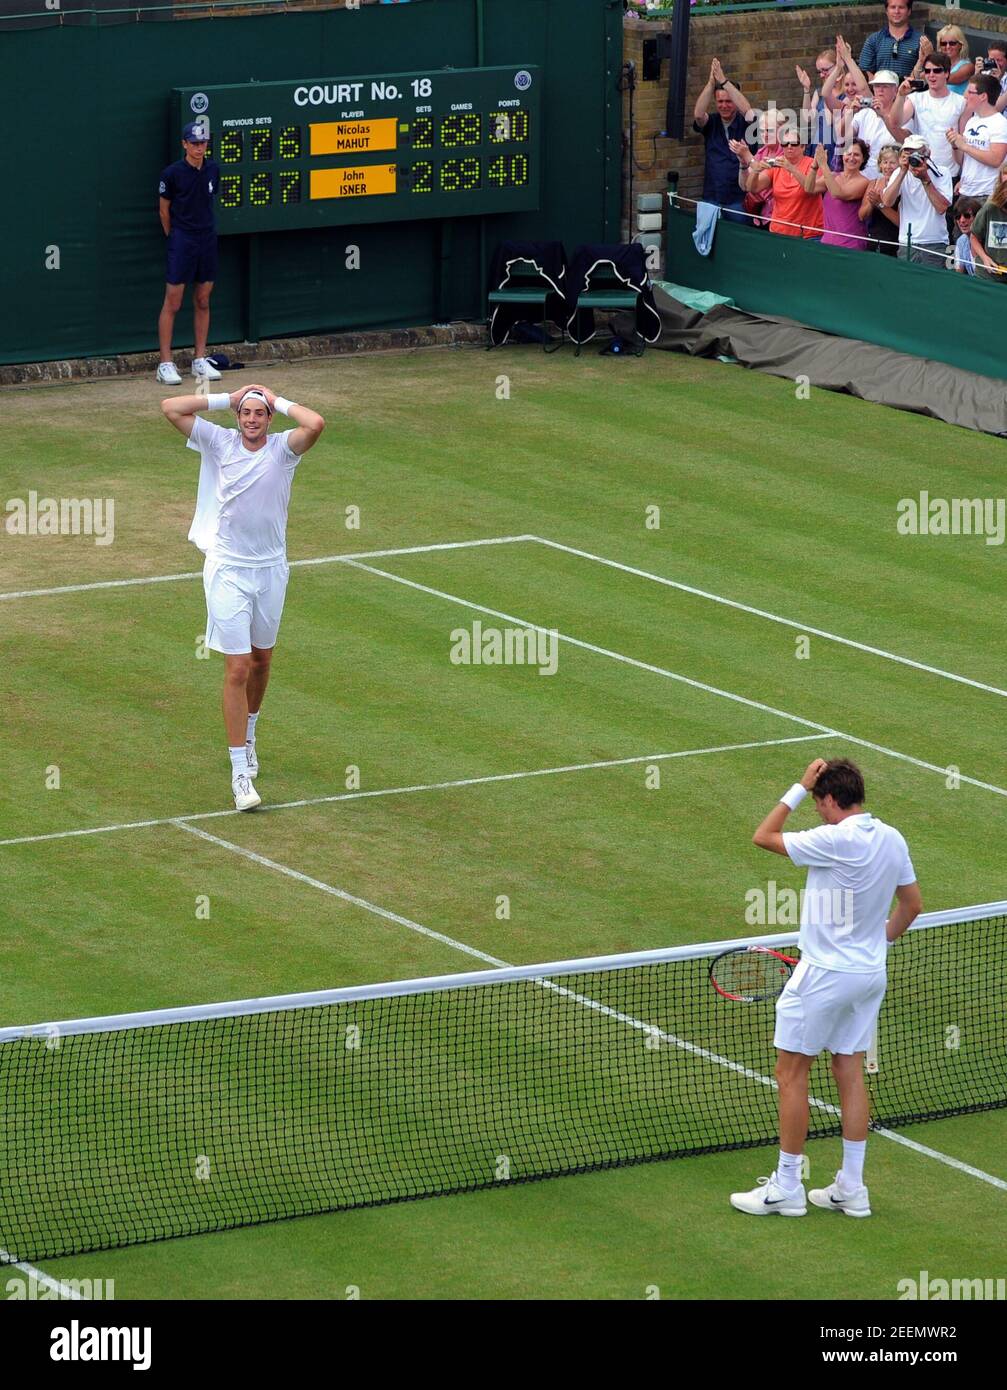 Tennis - Wimbledon - All England Lawn Tennis & Croquet Club, Wimbledon,  England - 24/6/10 John Isner of USA (L) celebrates victory in his first  round match against Nicolas Mahut of France (